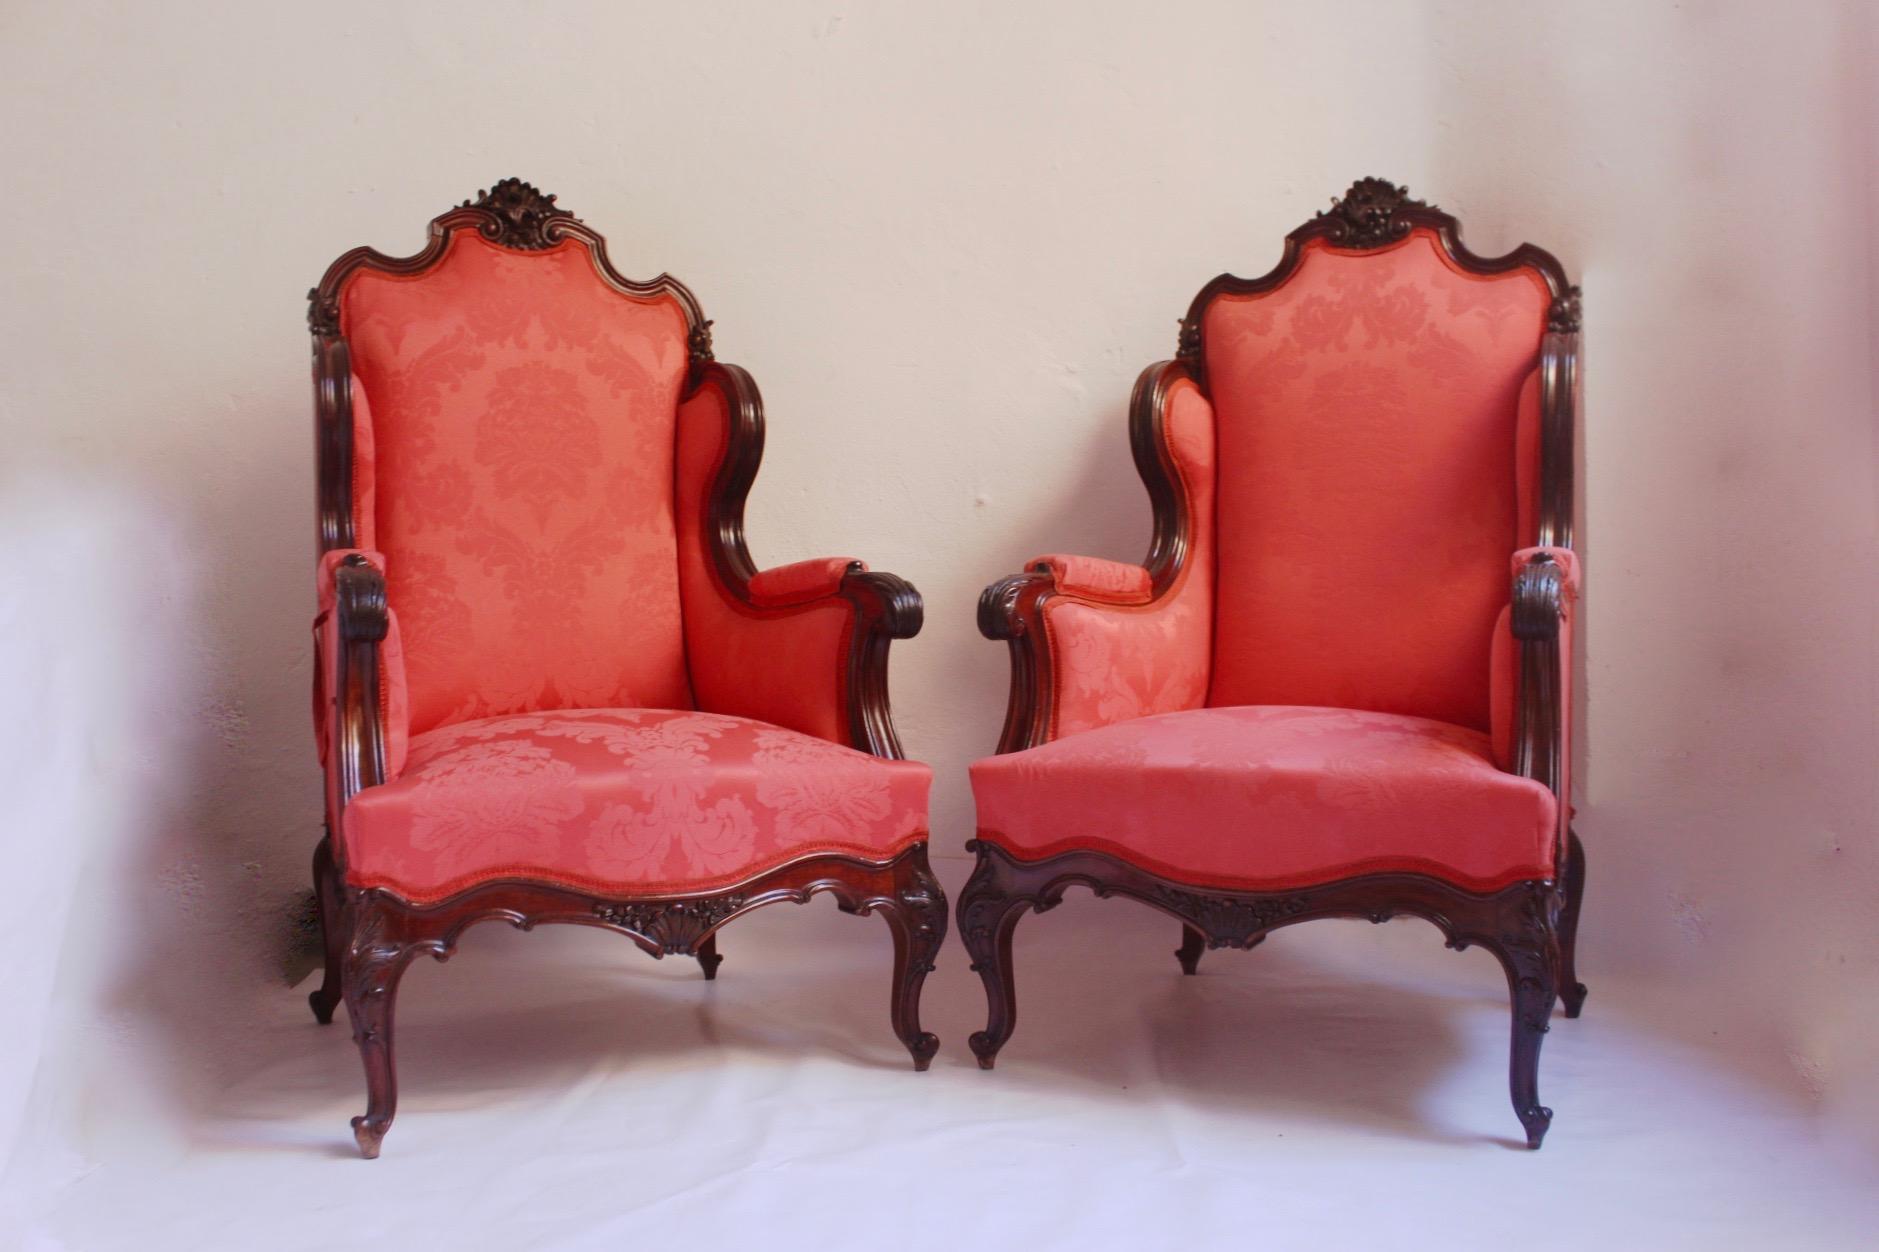 Unique Louis XV style handcrafted lounge set, 2 armchairs and one chair, Spain, circa 1950s.
Stunning set made in Valencia, Spain, by high class cabinet-makers for their own family. The whole set made from solid wood and upholstered in red silk.